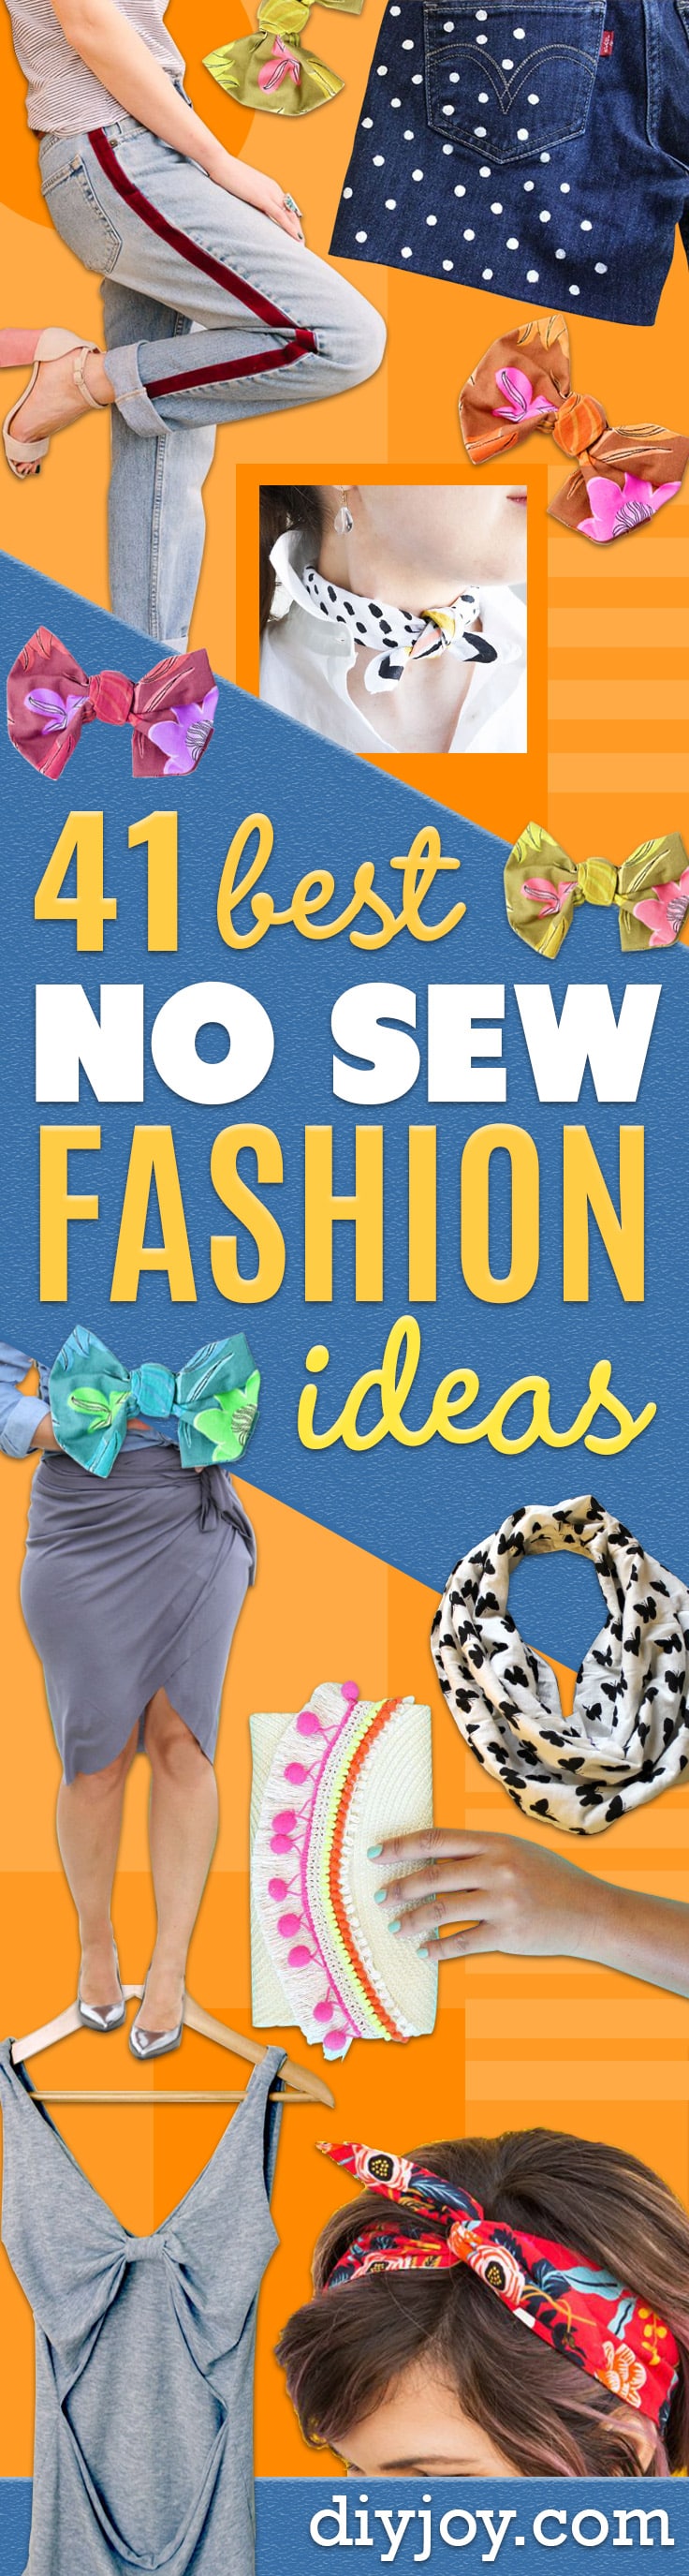 No Sew DIY Fashion Ideas - Easy No Sew Projects to Make for Clothes, Shirts, Jeans, Pants, Skirts, Kids Clothing No Sewing Project Ideas 